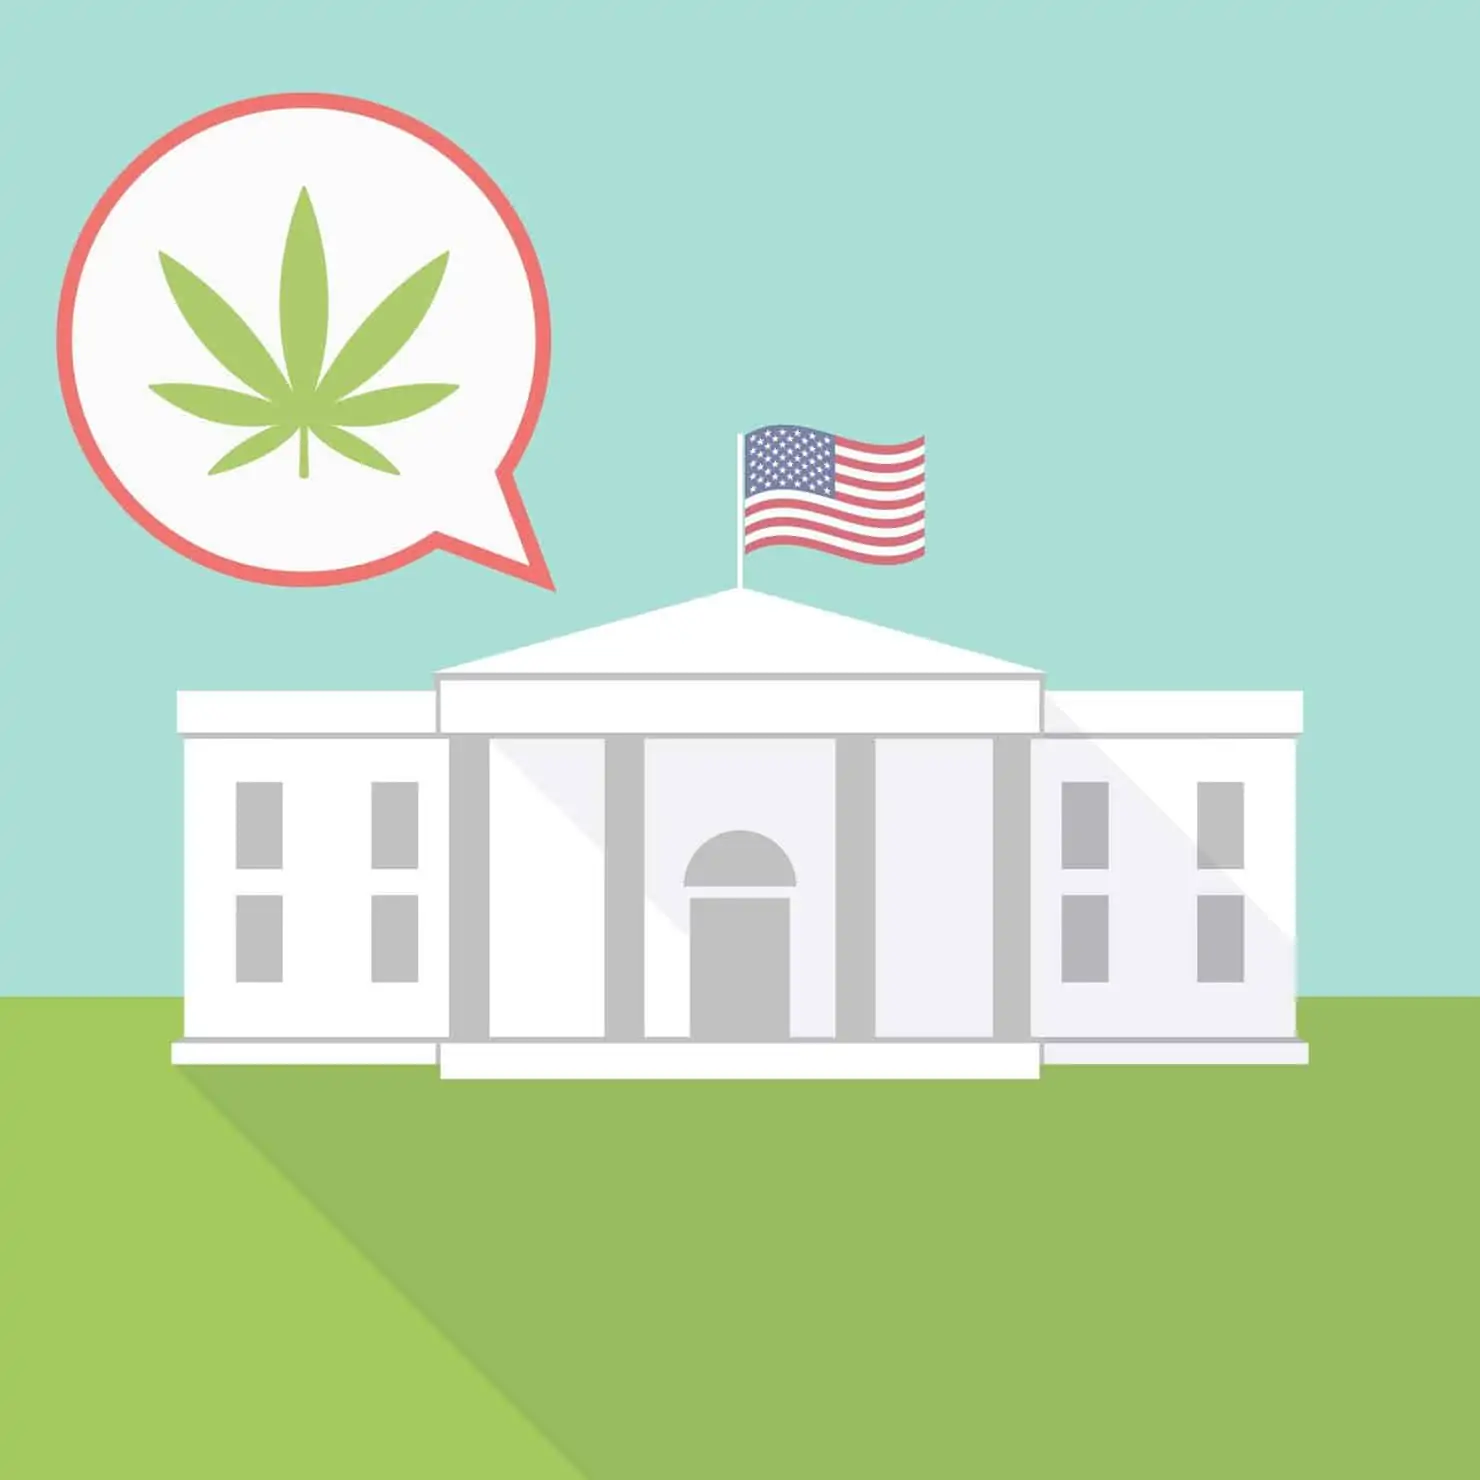 Is This Secret Trump Committee Planning To Undermine Legal Cannabis? White house 